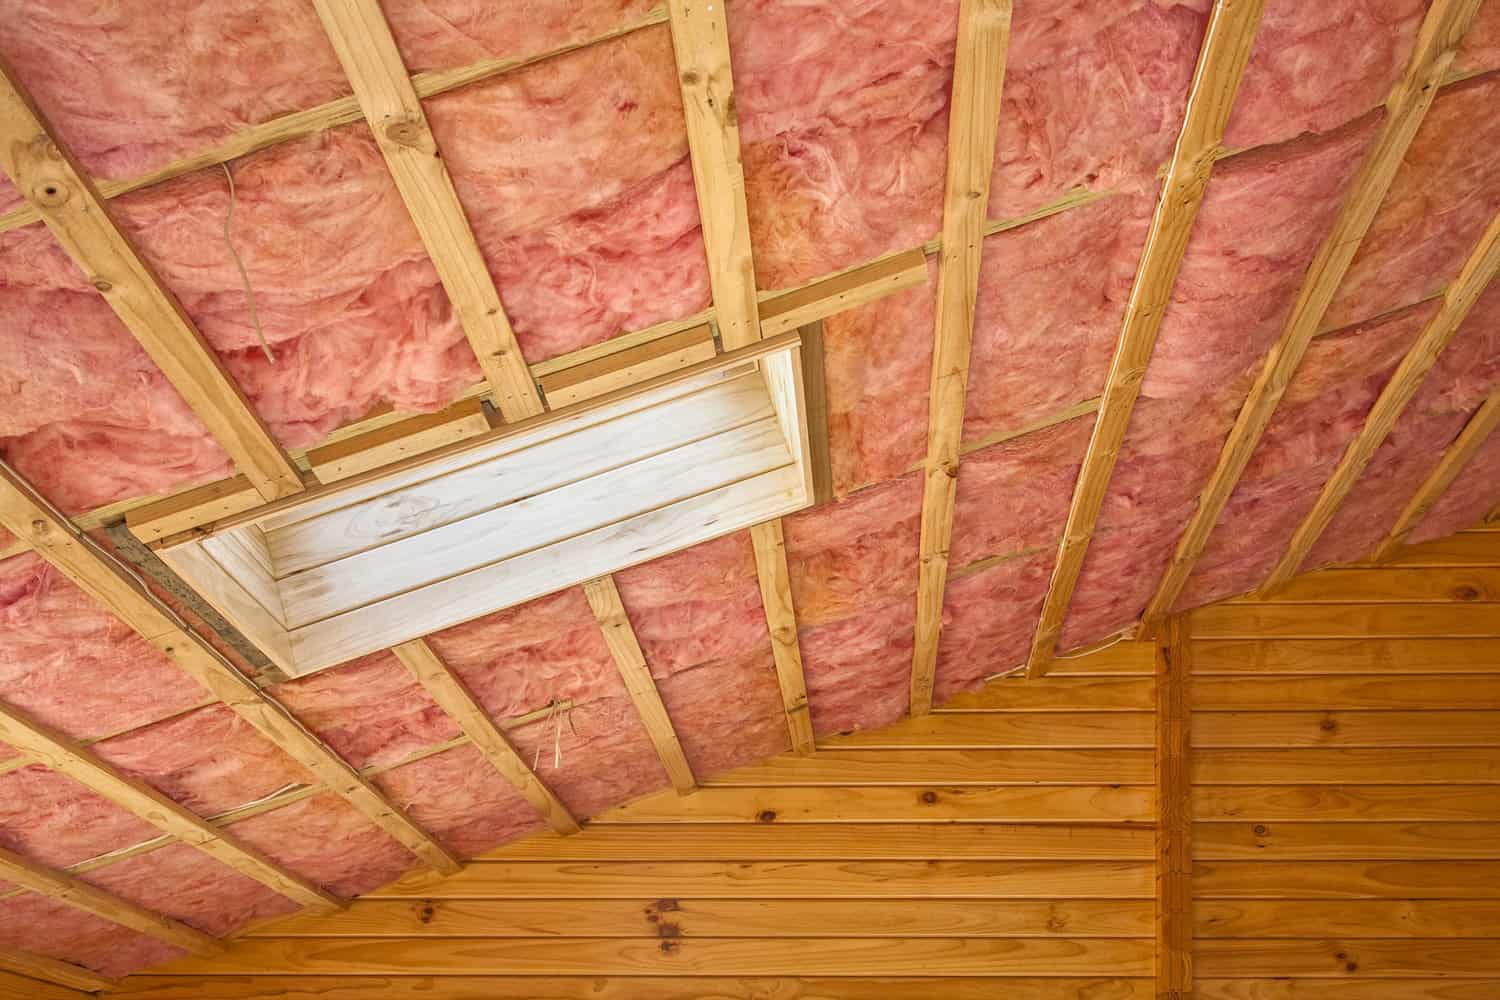 Fibreglass insulation installed in the sloping ceiling of a timber house.